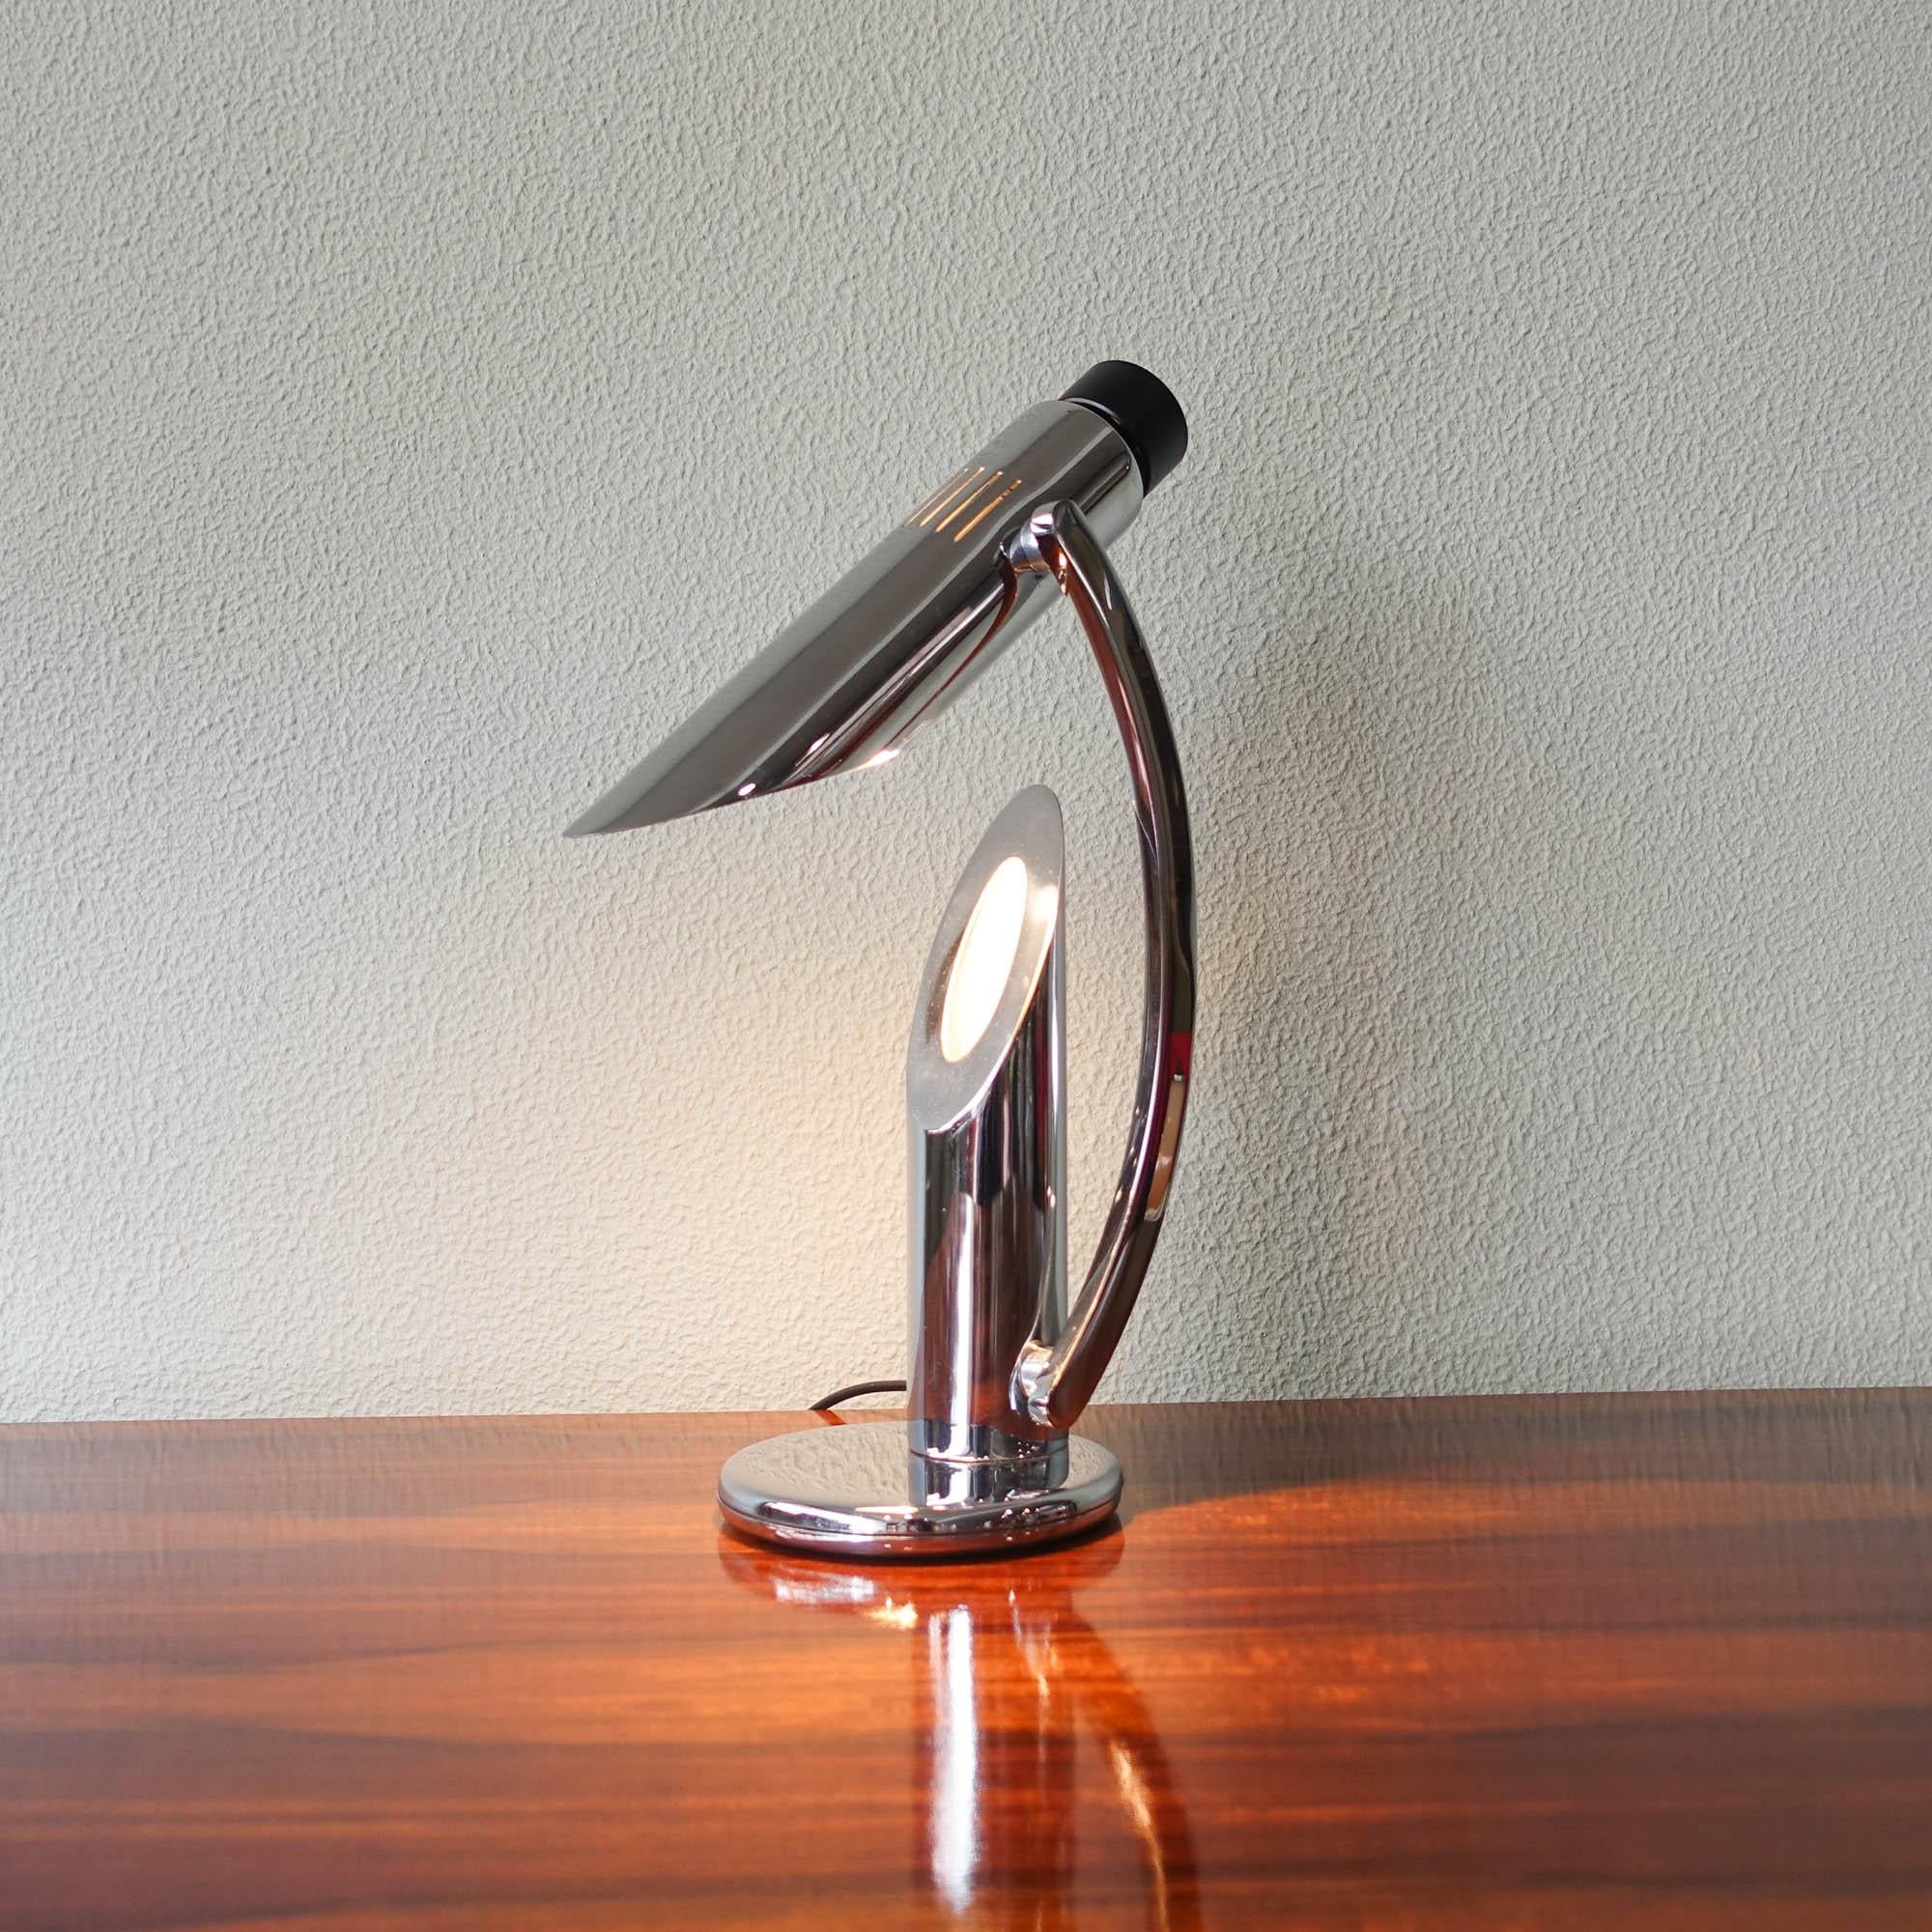 Mid-Century Modern Tharsis Foldable Chrome Table Lamp from Fase by Luis Perez de la Oliva, 1973